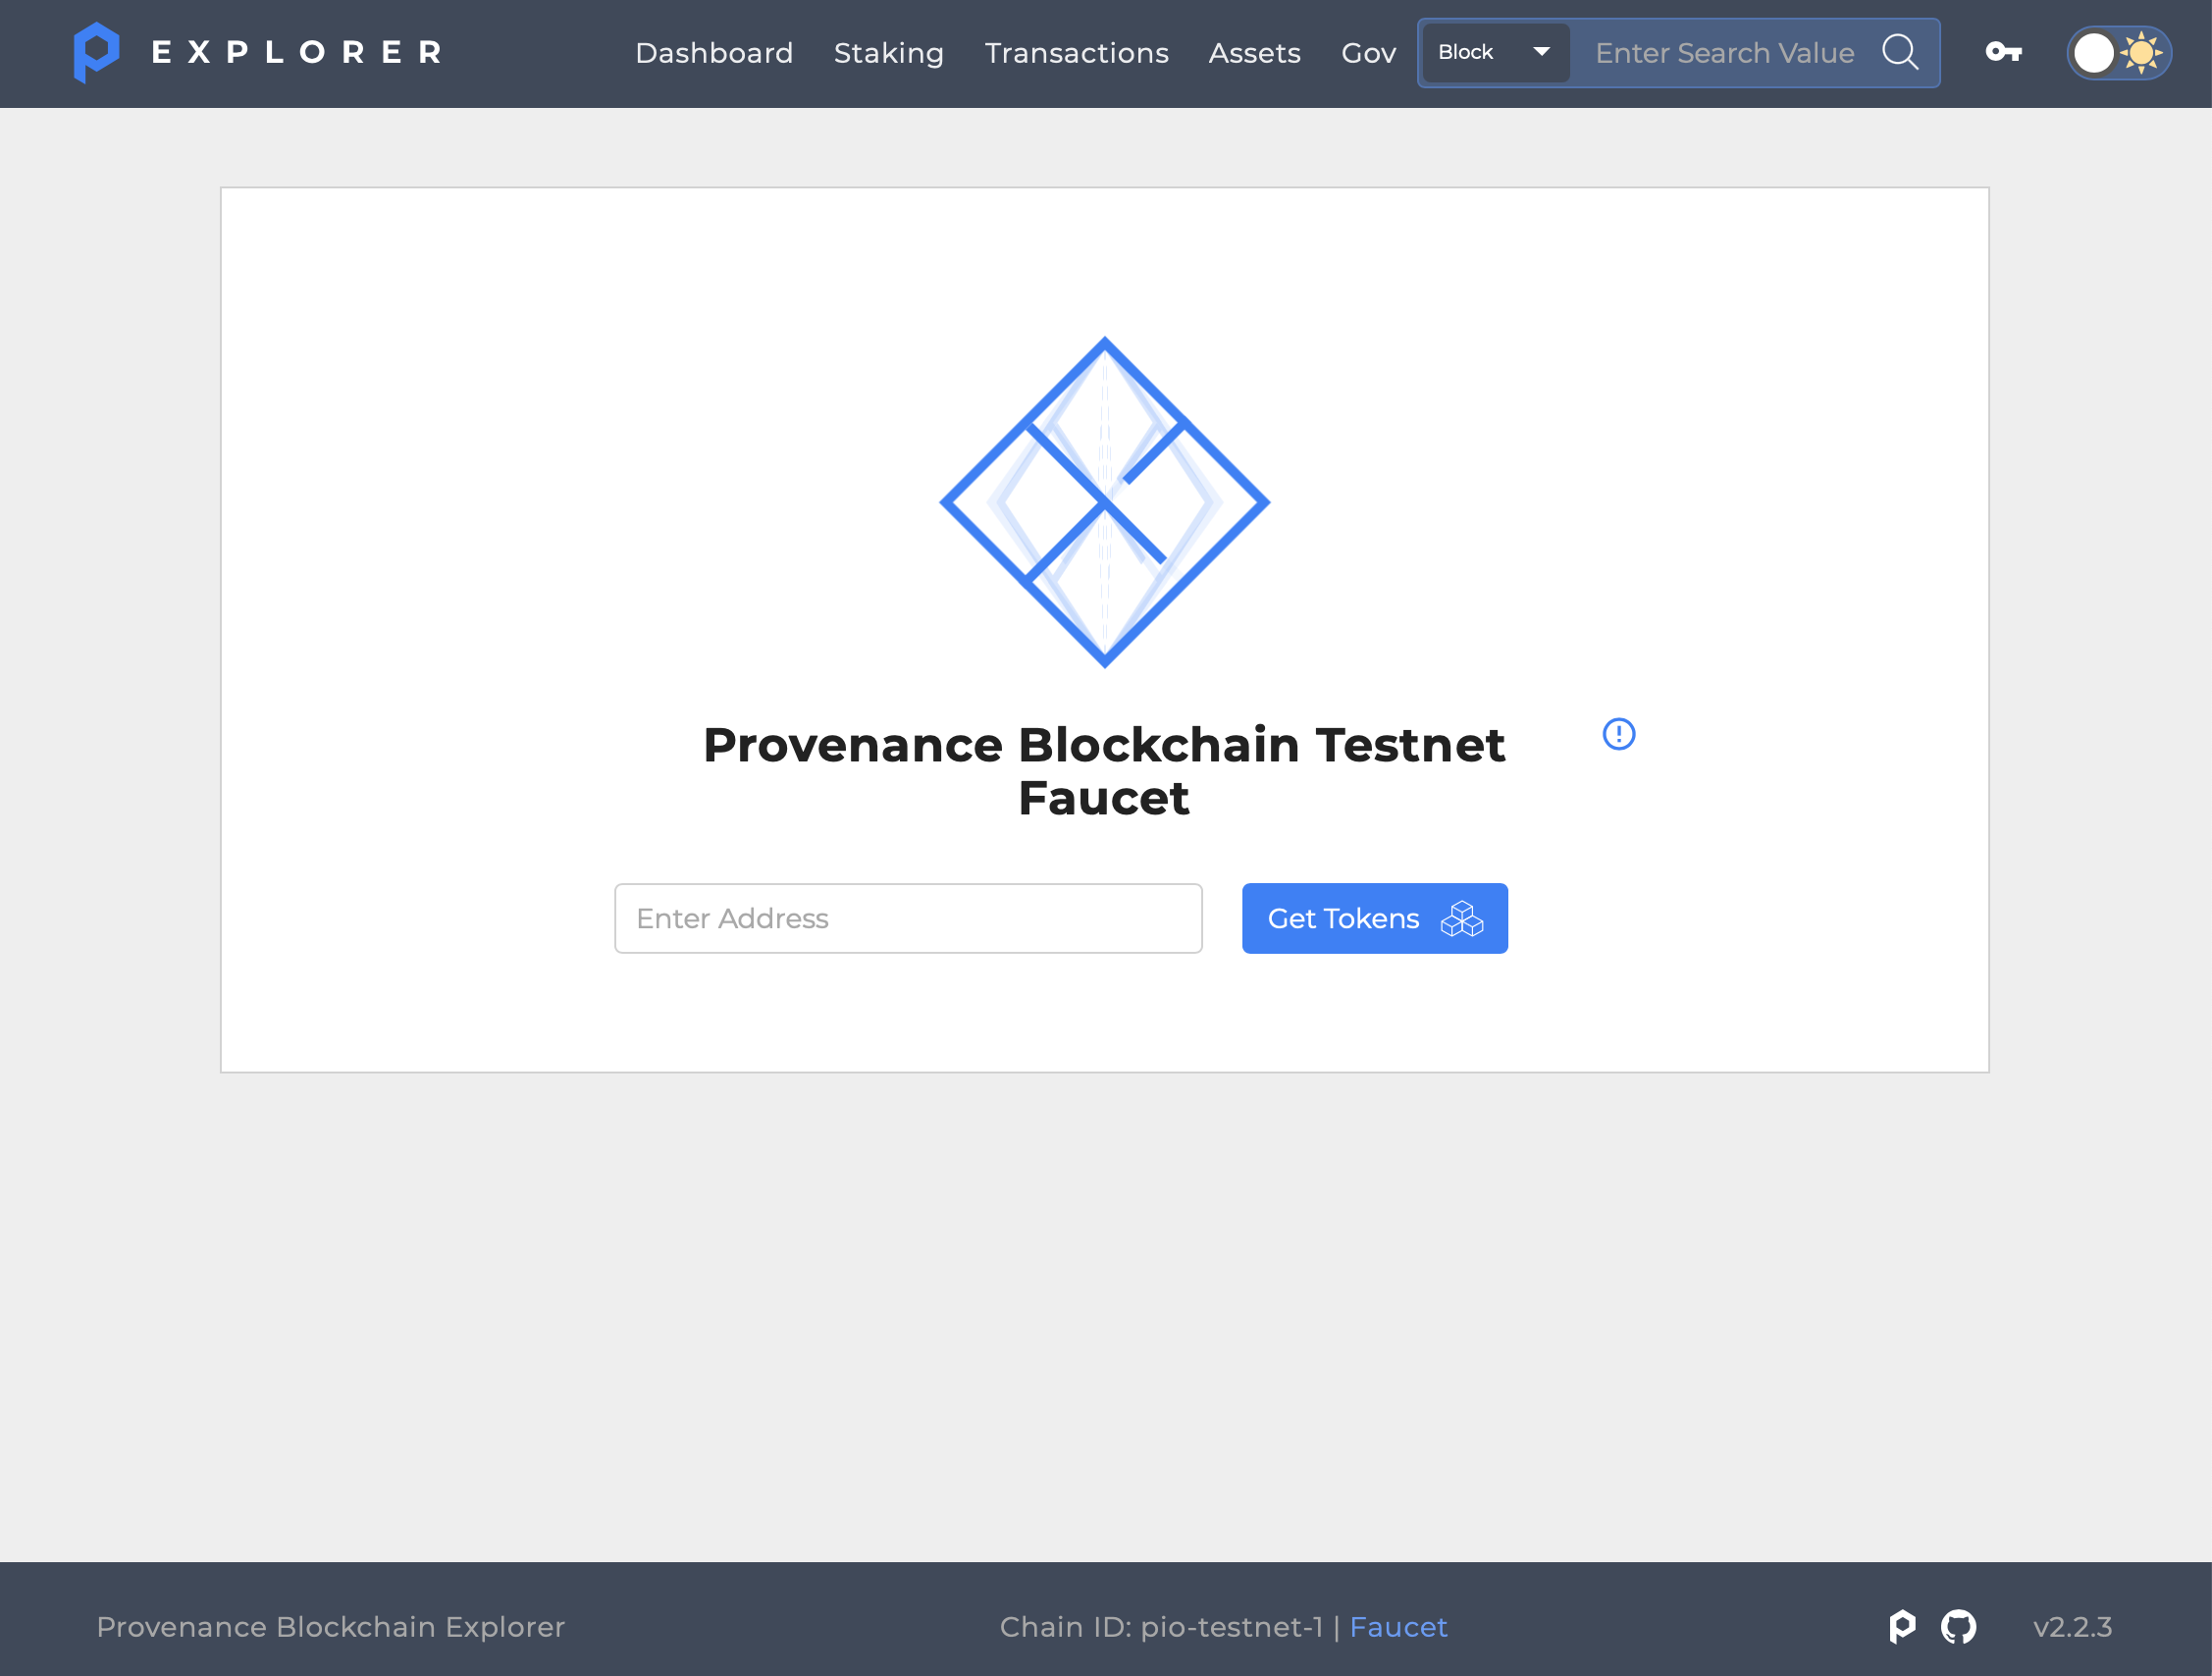 Use the testnet Faucet to get Hash